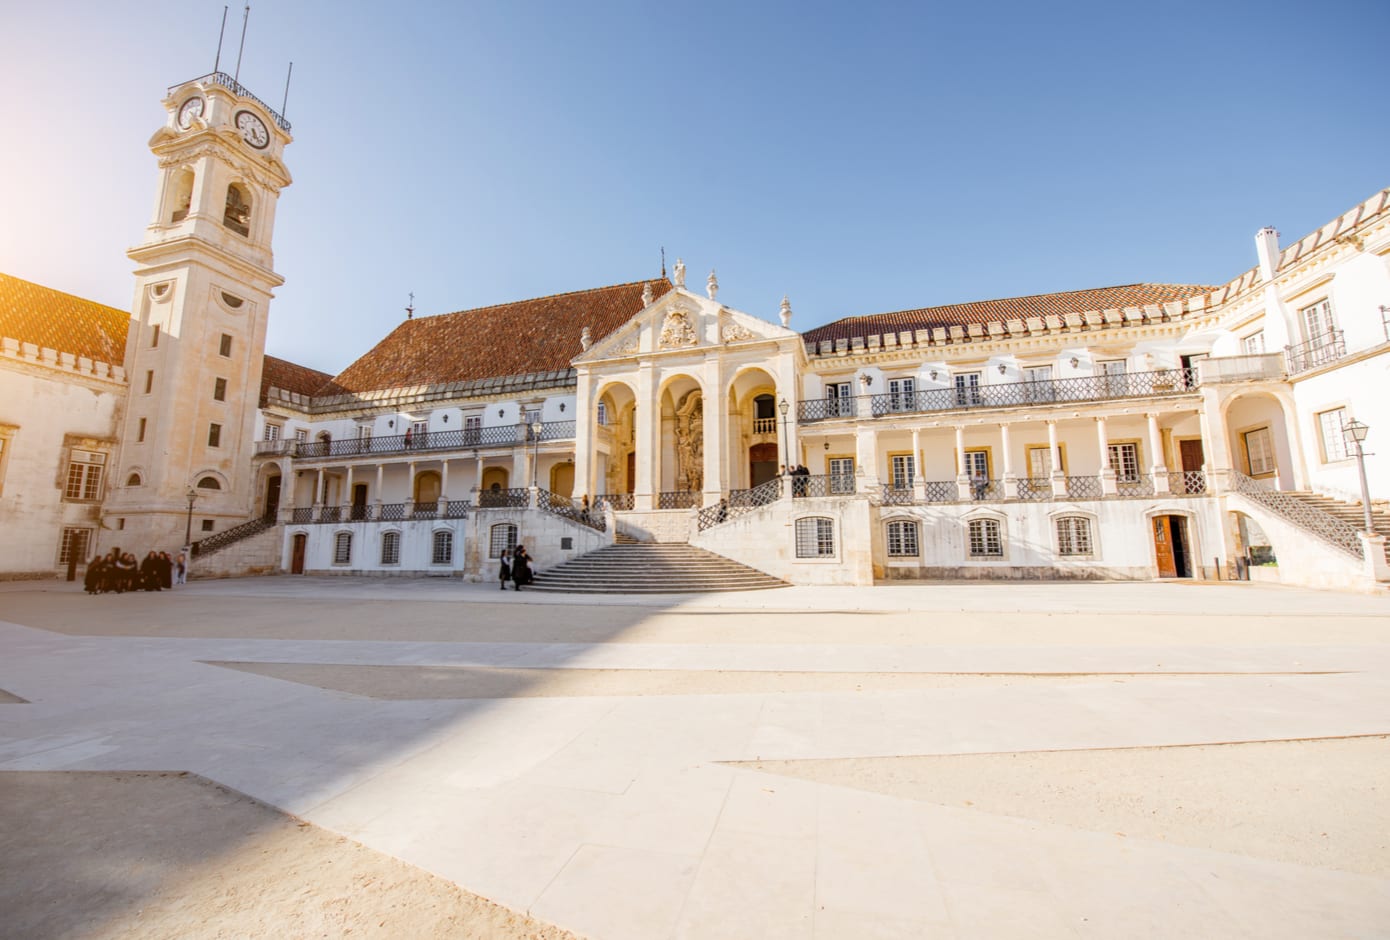 The courtyard of the University of Coimbra, Portugal